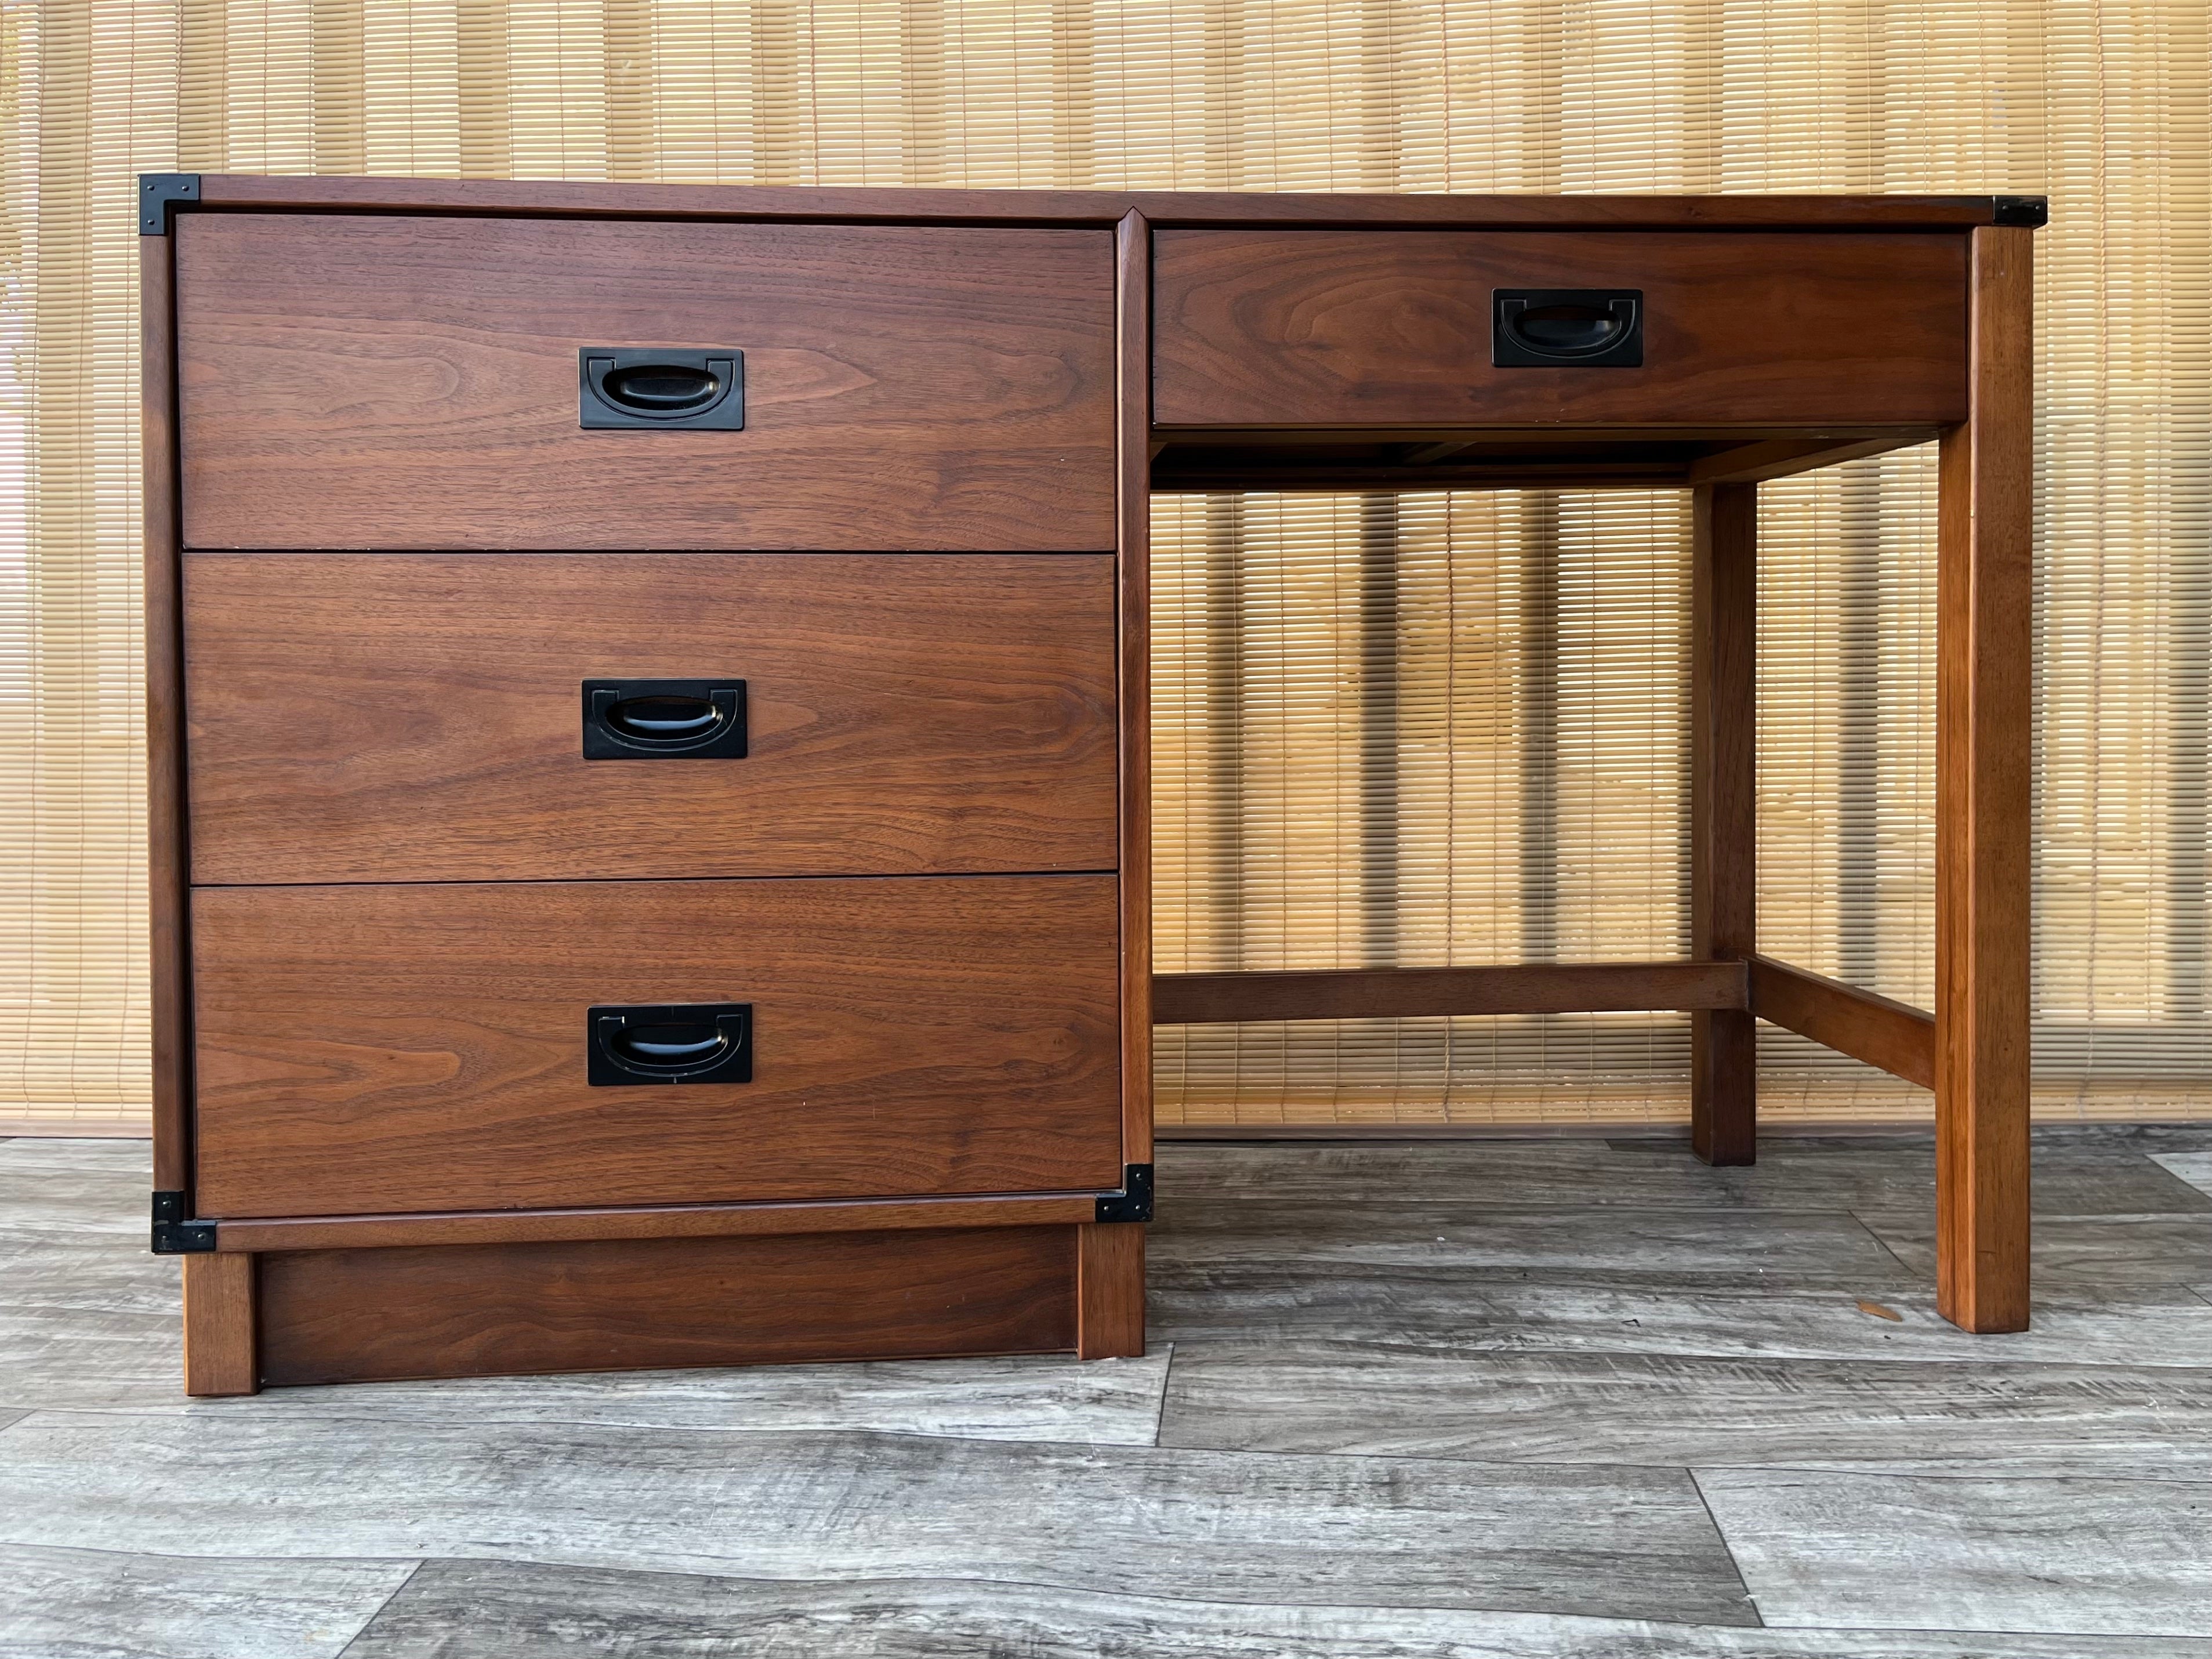 Vintage Mid-Century Modern writing desk by Drexel New Generation. Circa 1960s 
Features three spacious side drawers plus a pencil drawer with dovetail joints and a black hardware, a beautiful dark walnut wood grain, and the perfect sizing for small